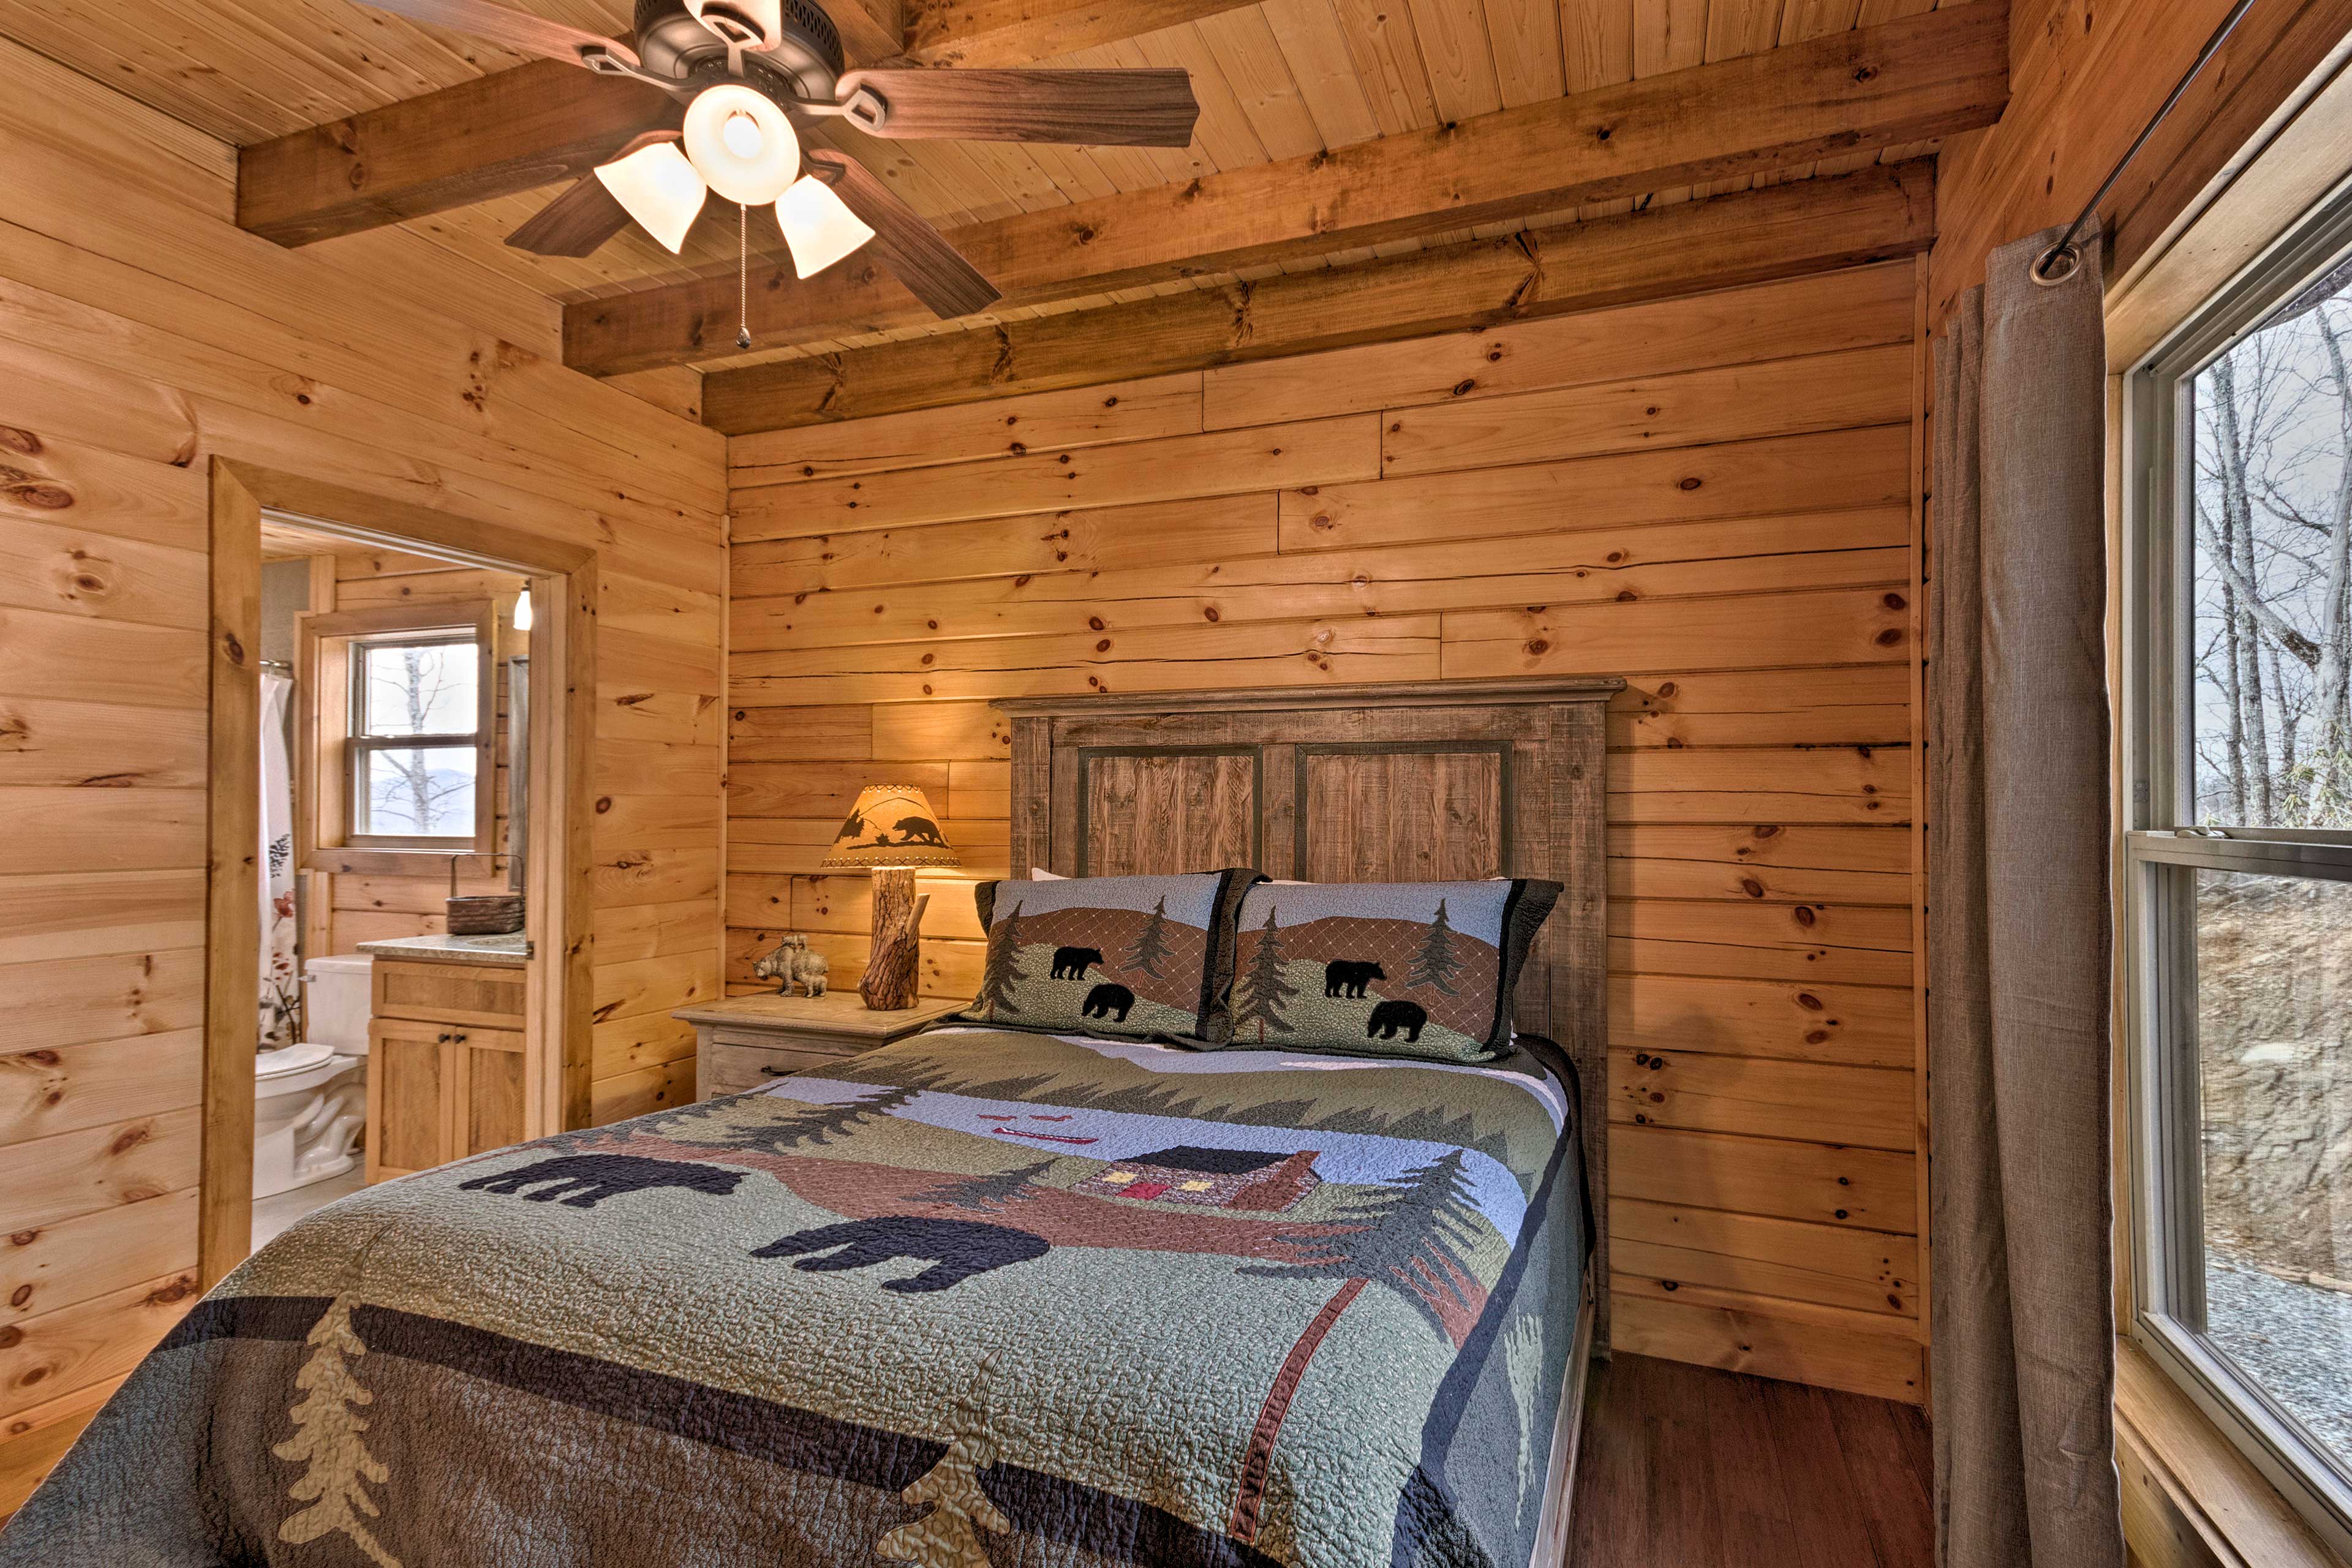 Two Bedroom Rustic Log Cabin Rental in the Mountains Near Bryson City NC